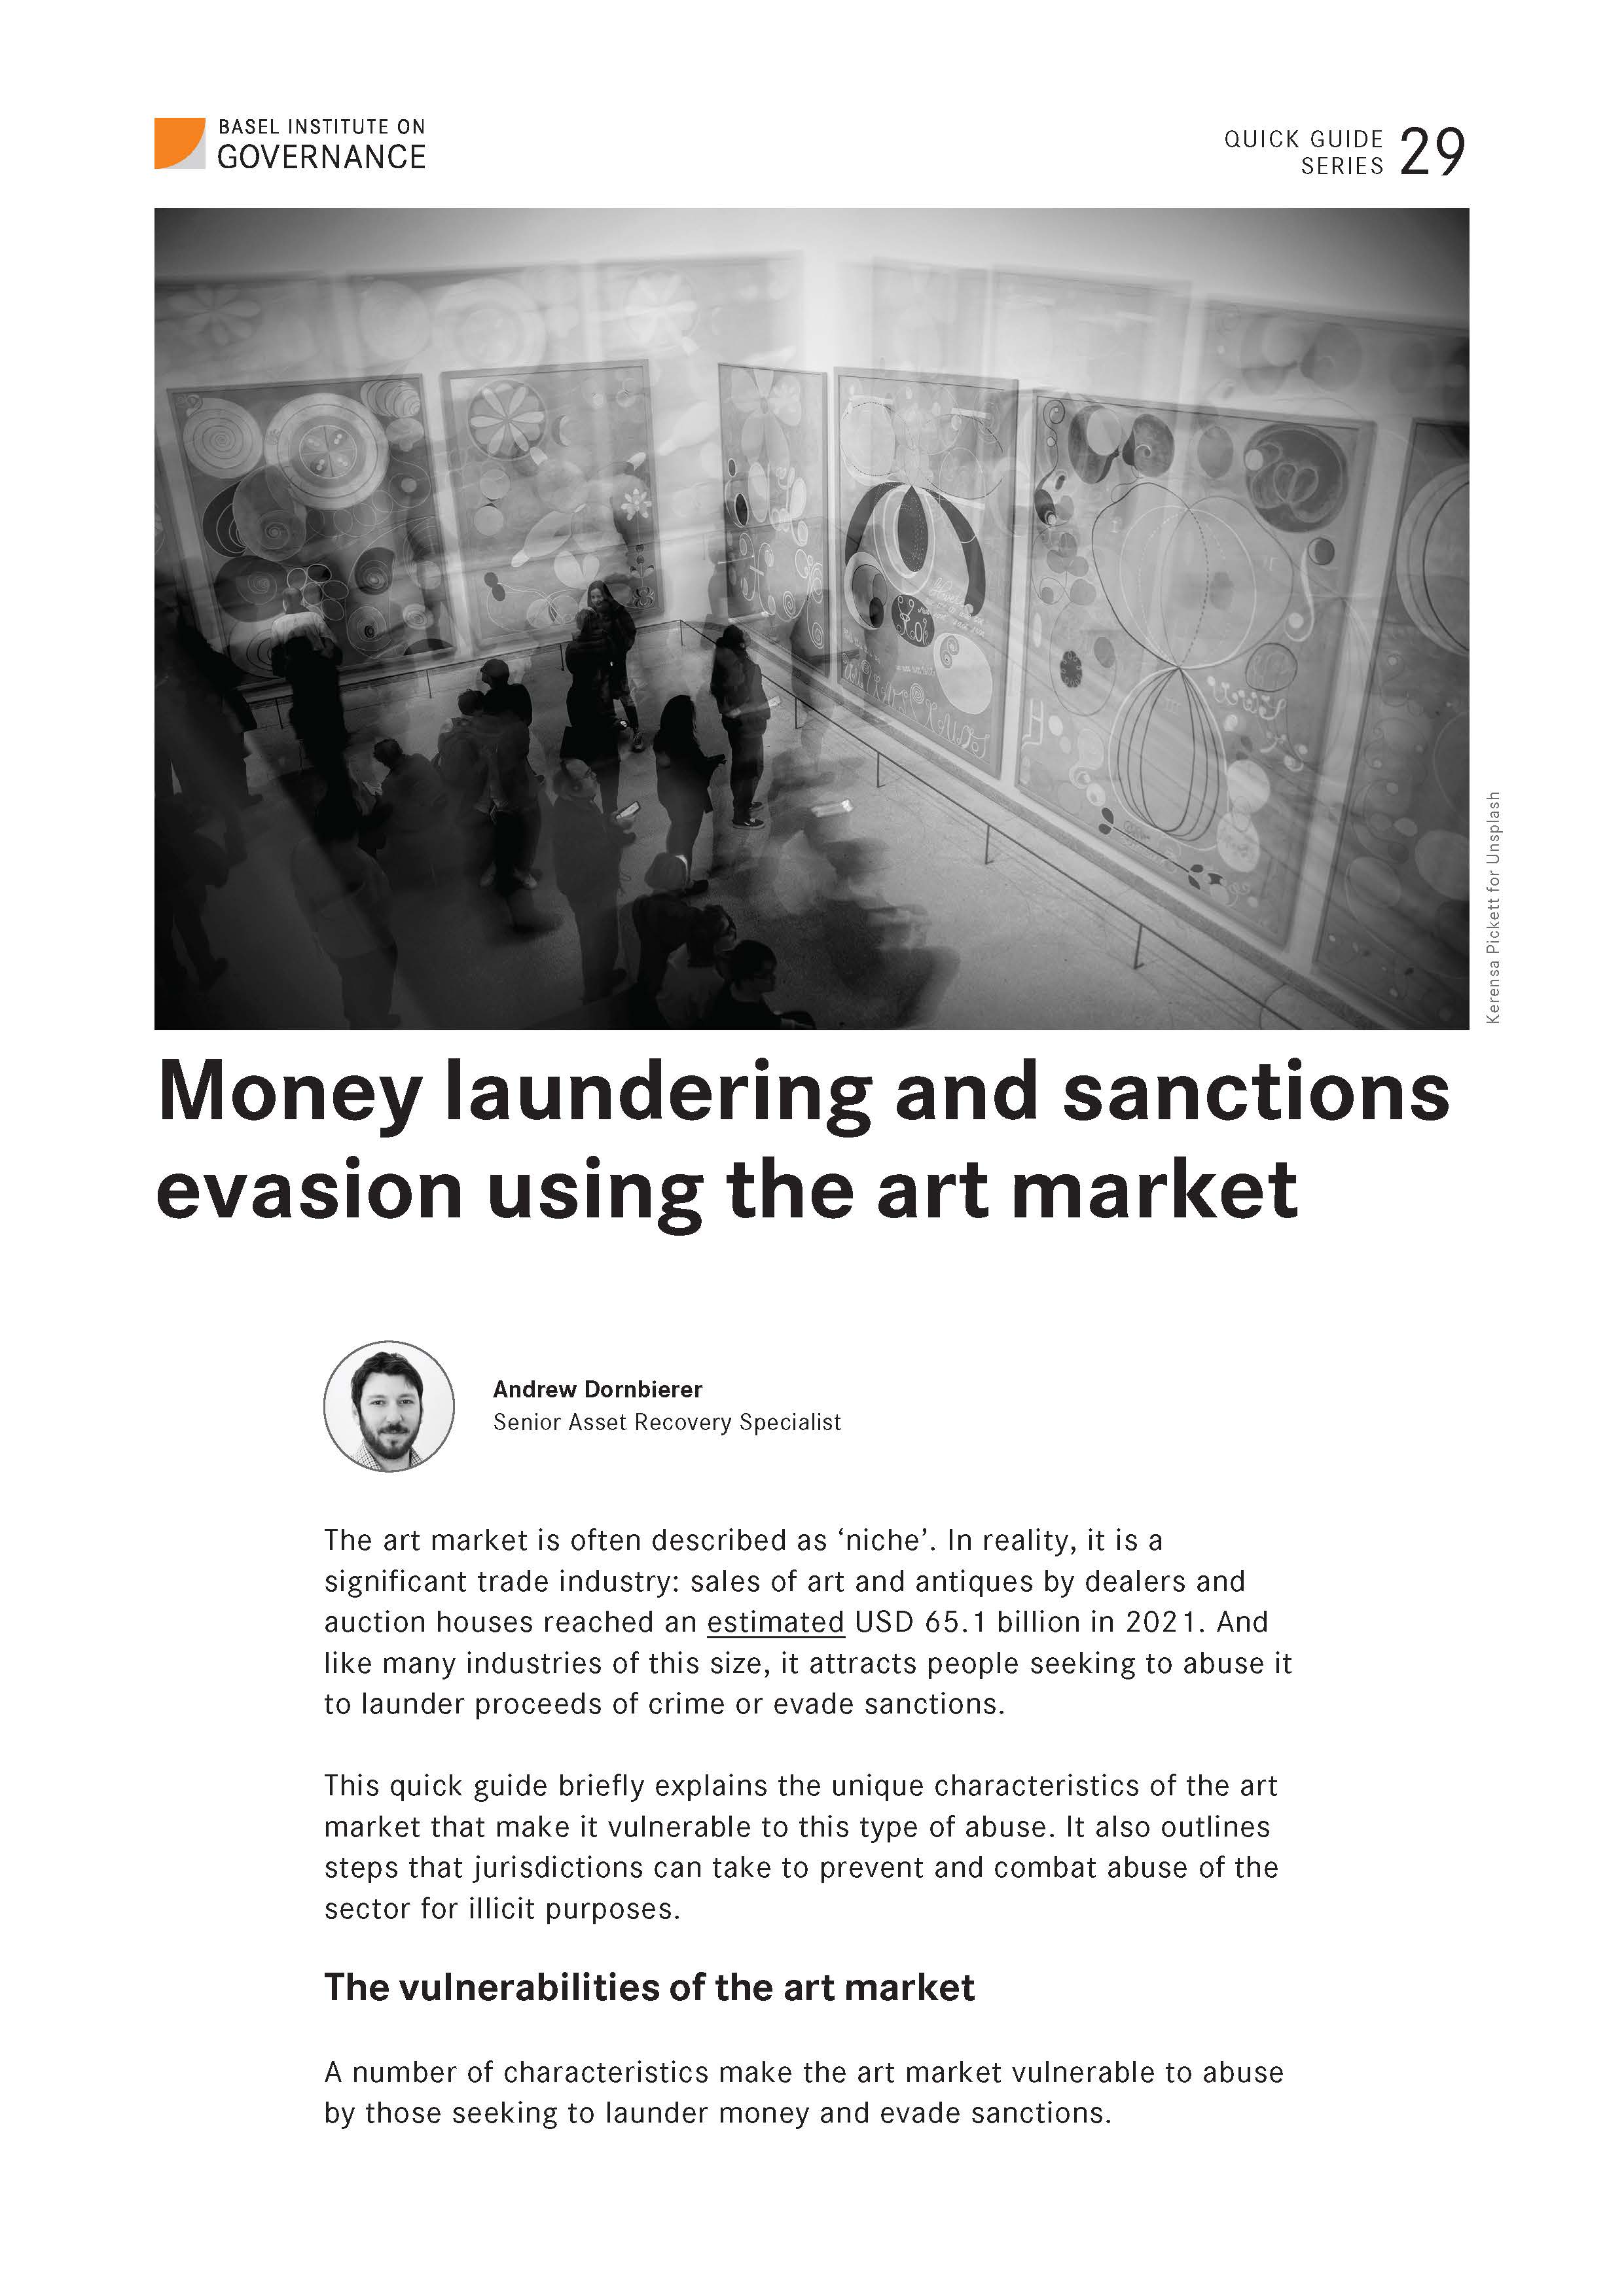 Money laundering and sanctions evasion using the art market